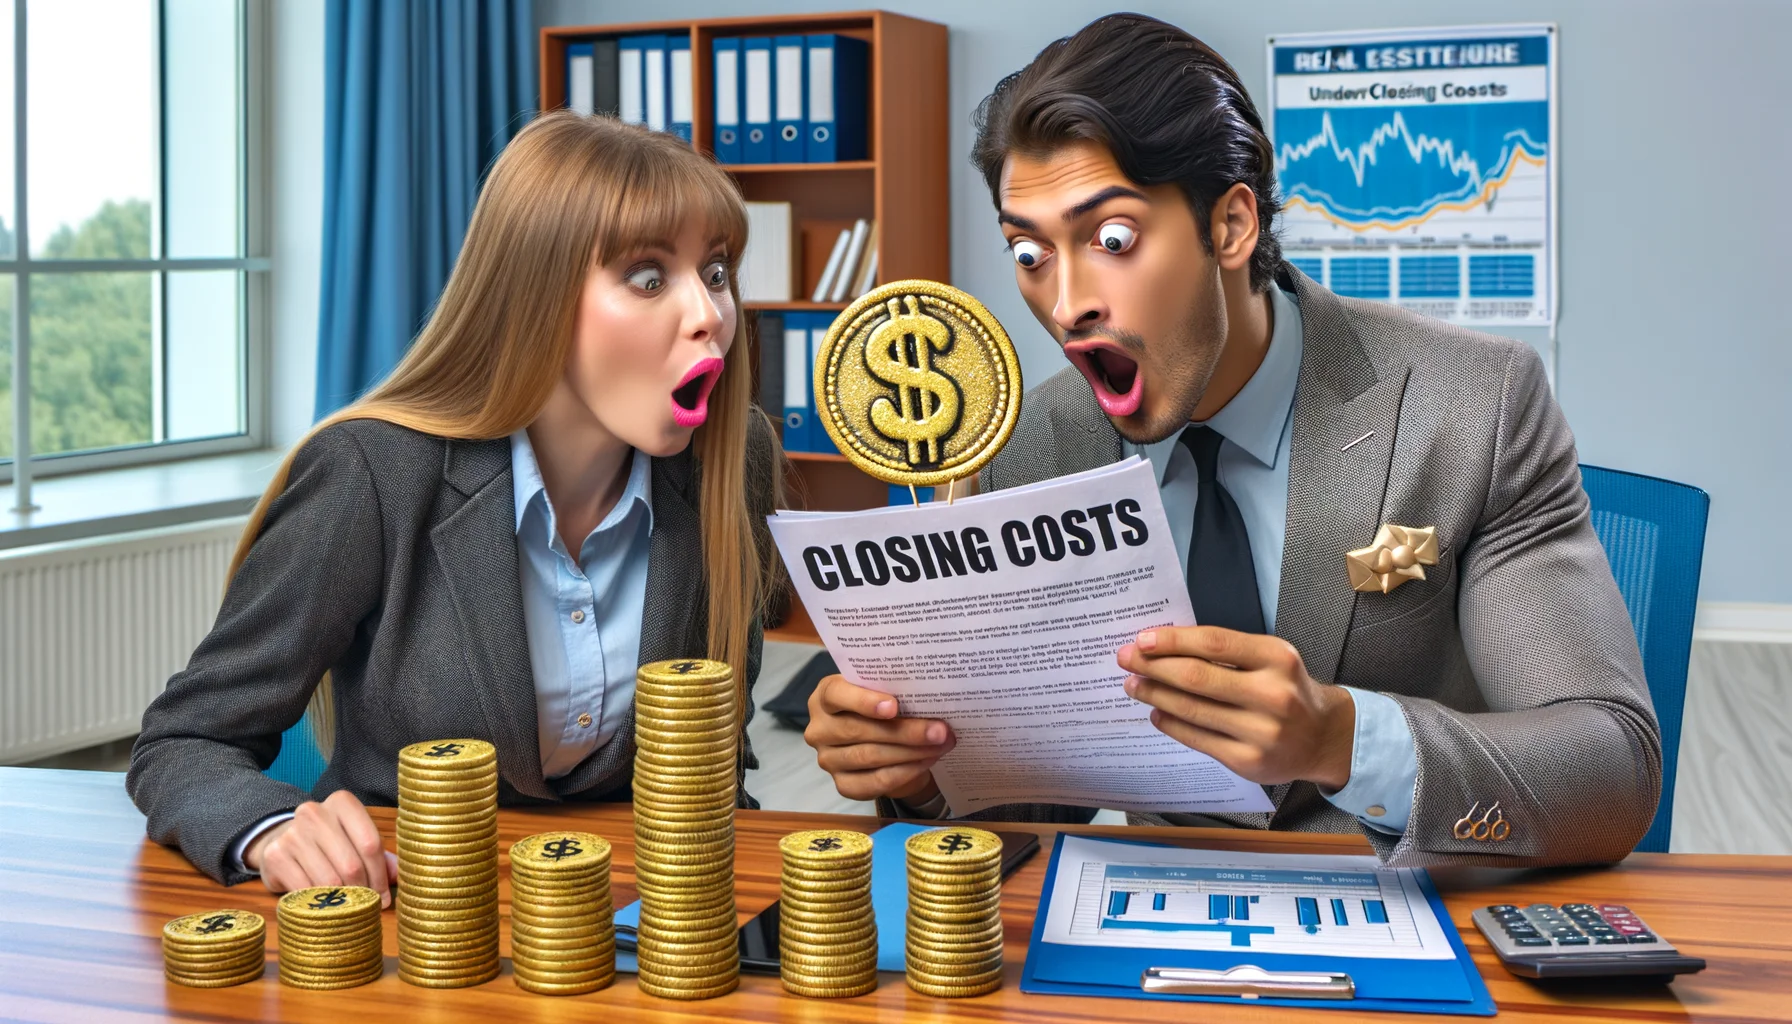 Create a humorous image that showcases the concept of understanding closing costs, focused on a real estate scenario. The image star a South Asian male real estate agent comically explaining the details of closing costs using oversized toy coins and paperwork to a Caucasian female homebuyer. Both of them are in an office with real estate advertisements and charts in the background, their faces are expressing surprise and laughter.